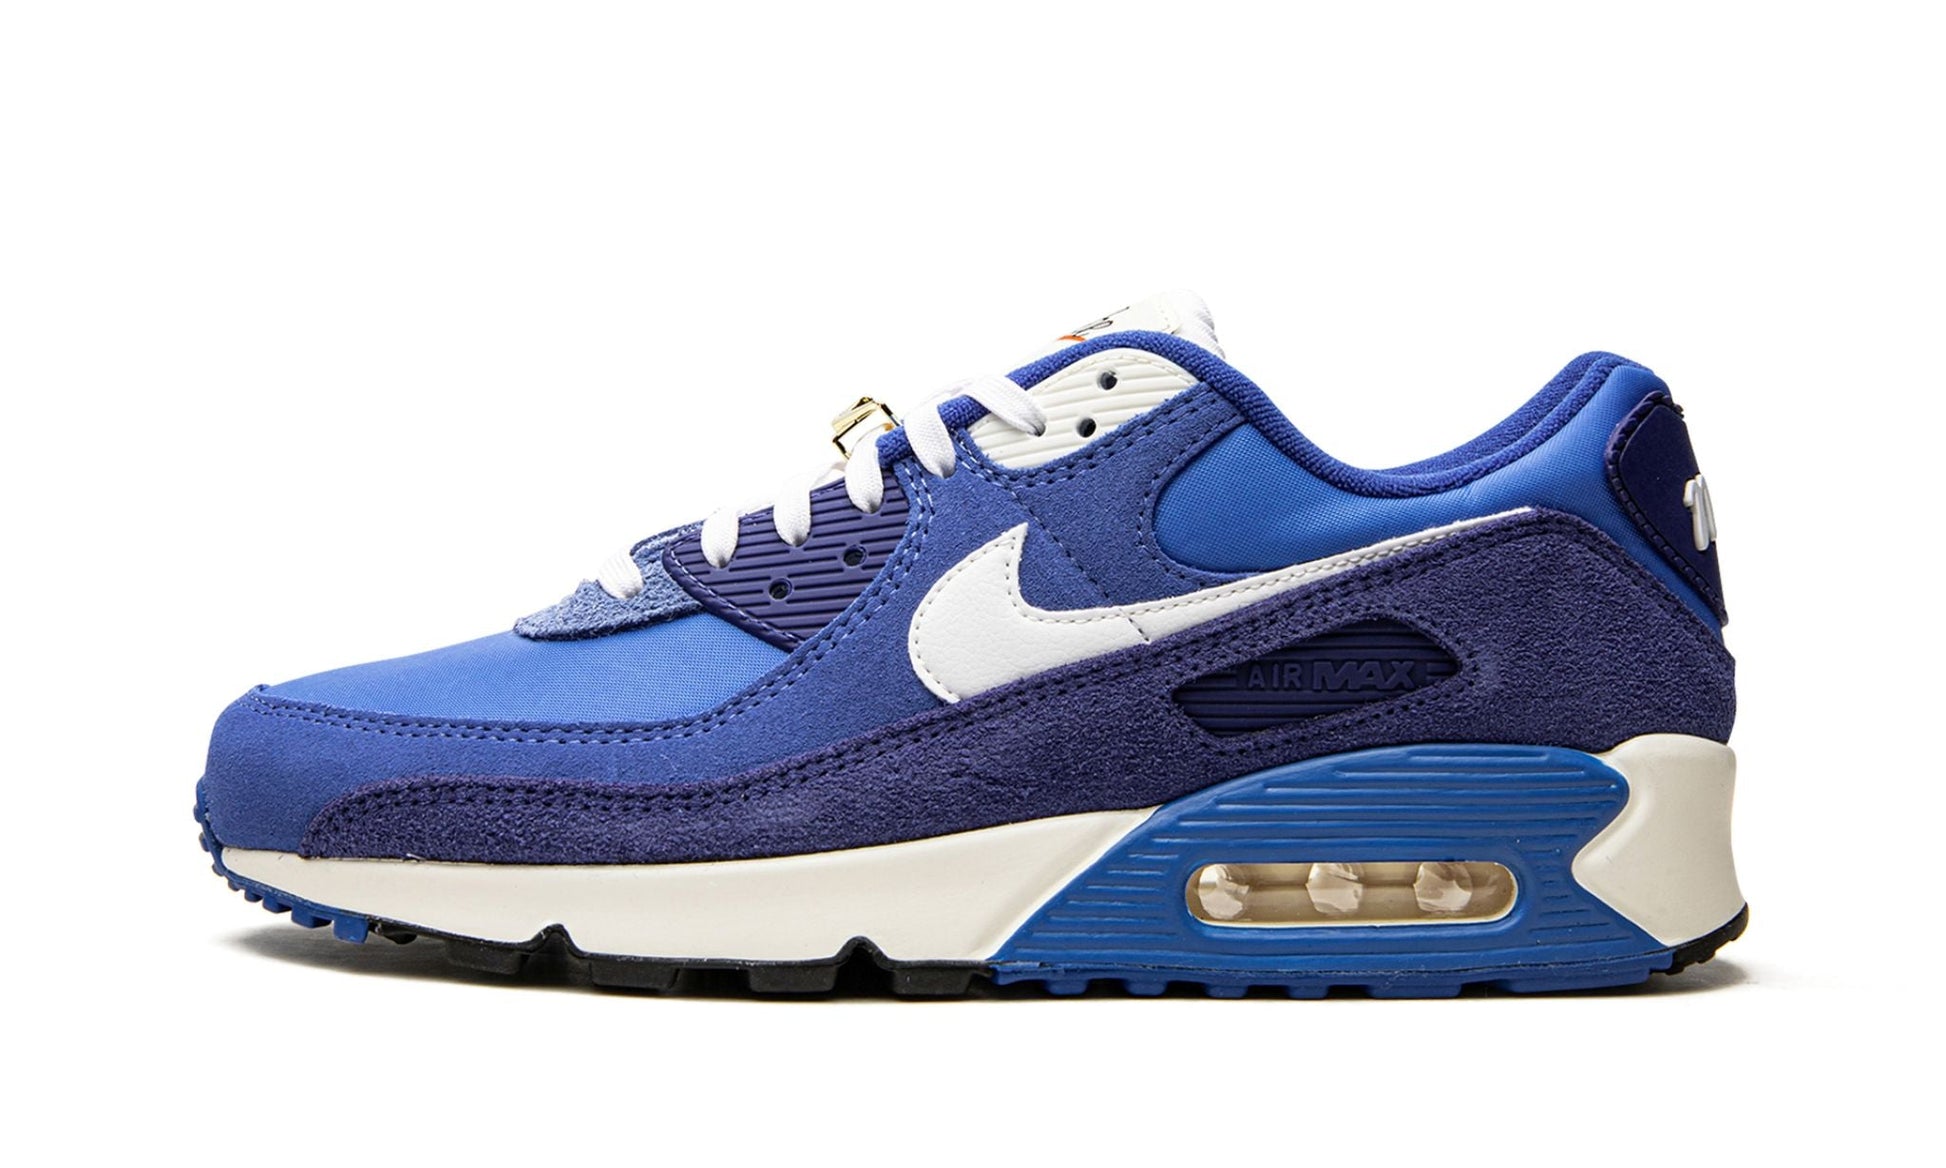 AIR MAX 90 SE "FIRST USE PACK - SIGNAL BLUE"